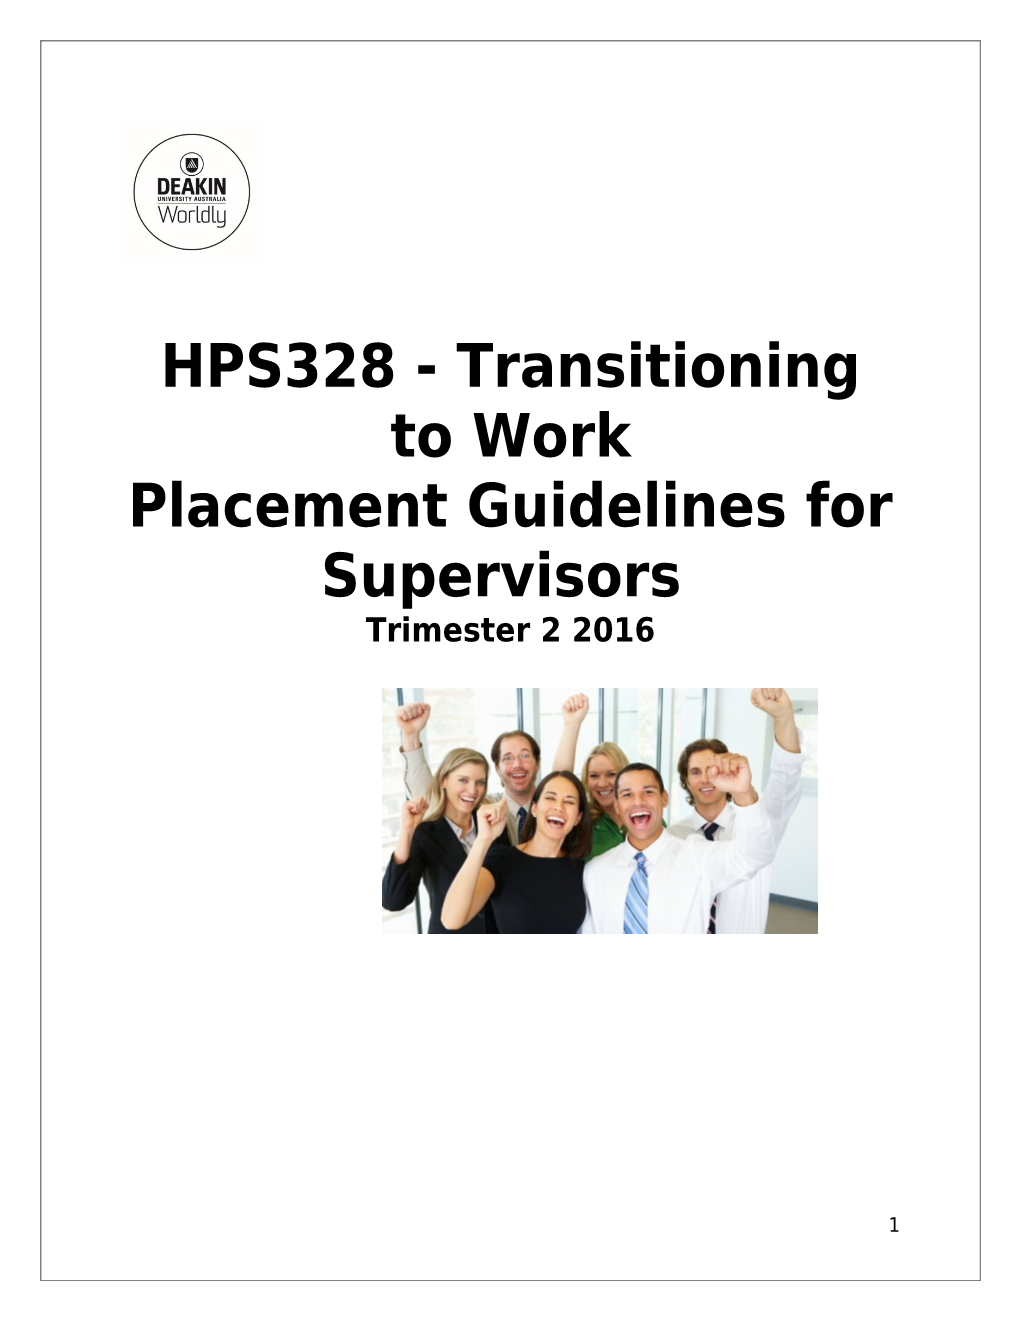 Placement Guidelines for Supervisors